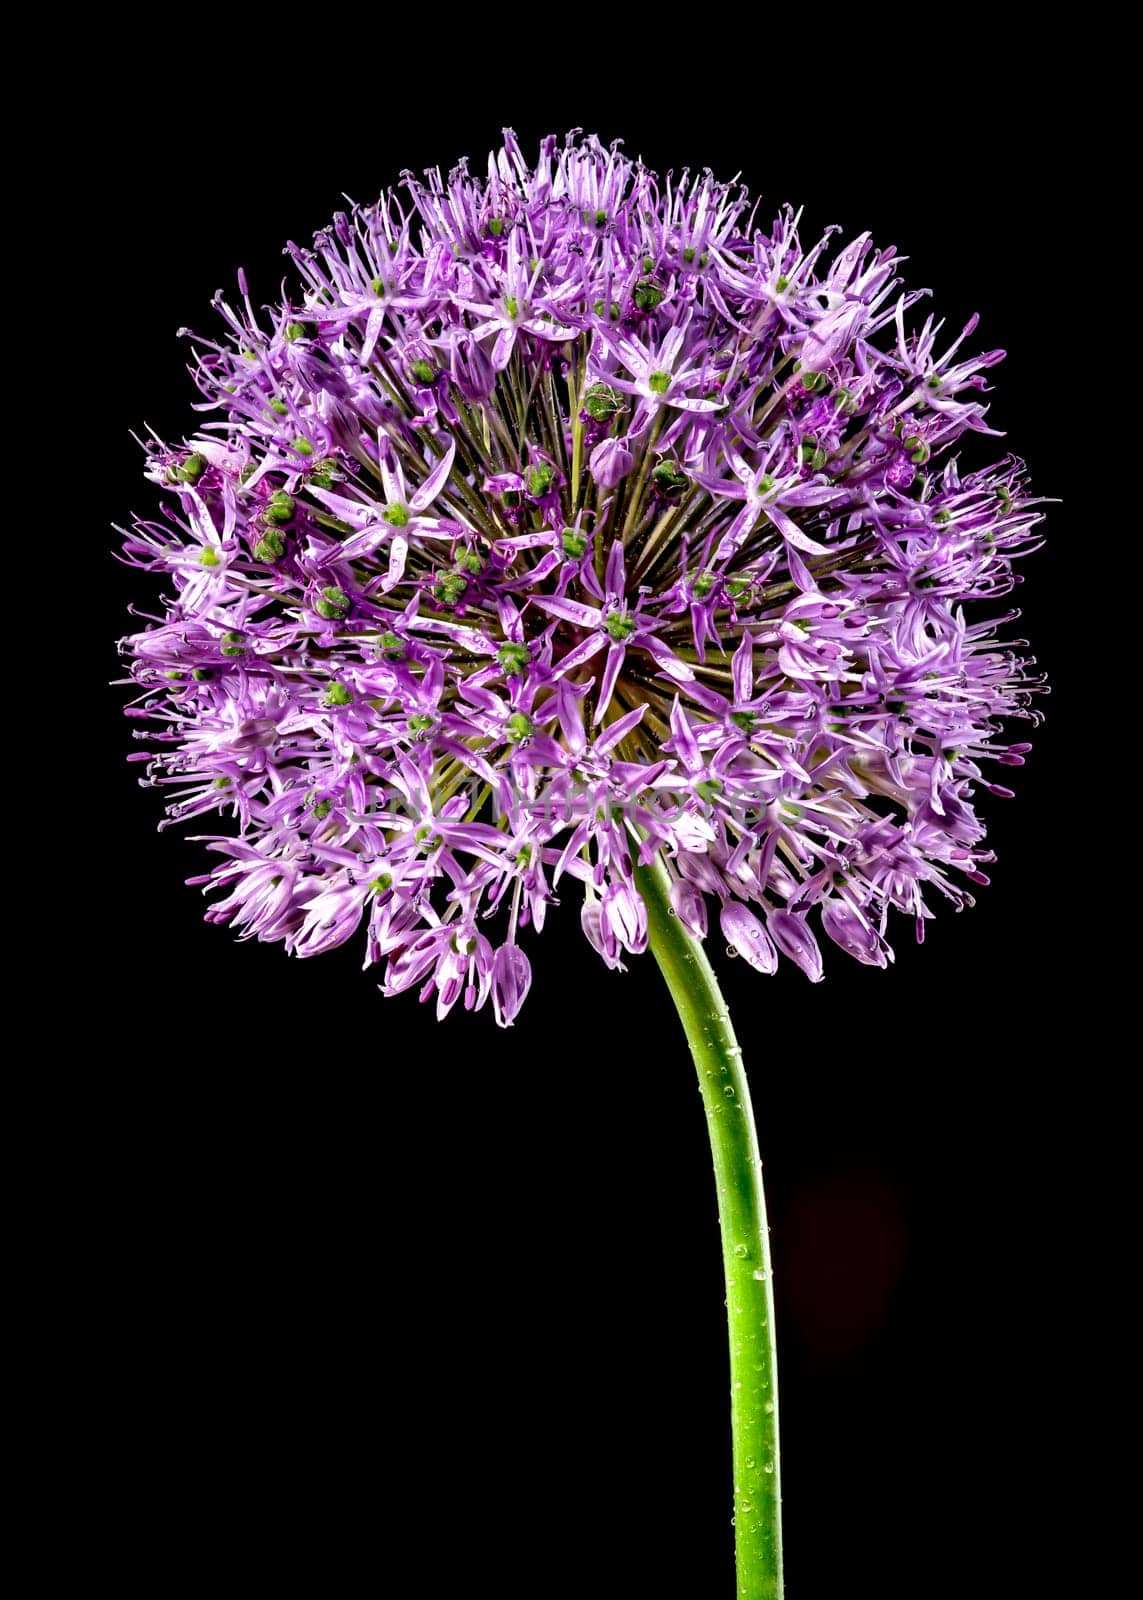 Beautiful Blooming pink flowers of allium aflatunense or ornamental onion on a black background. Flower head close-up.